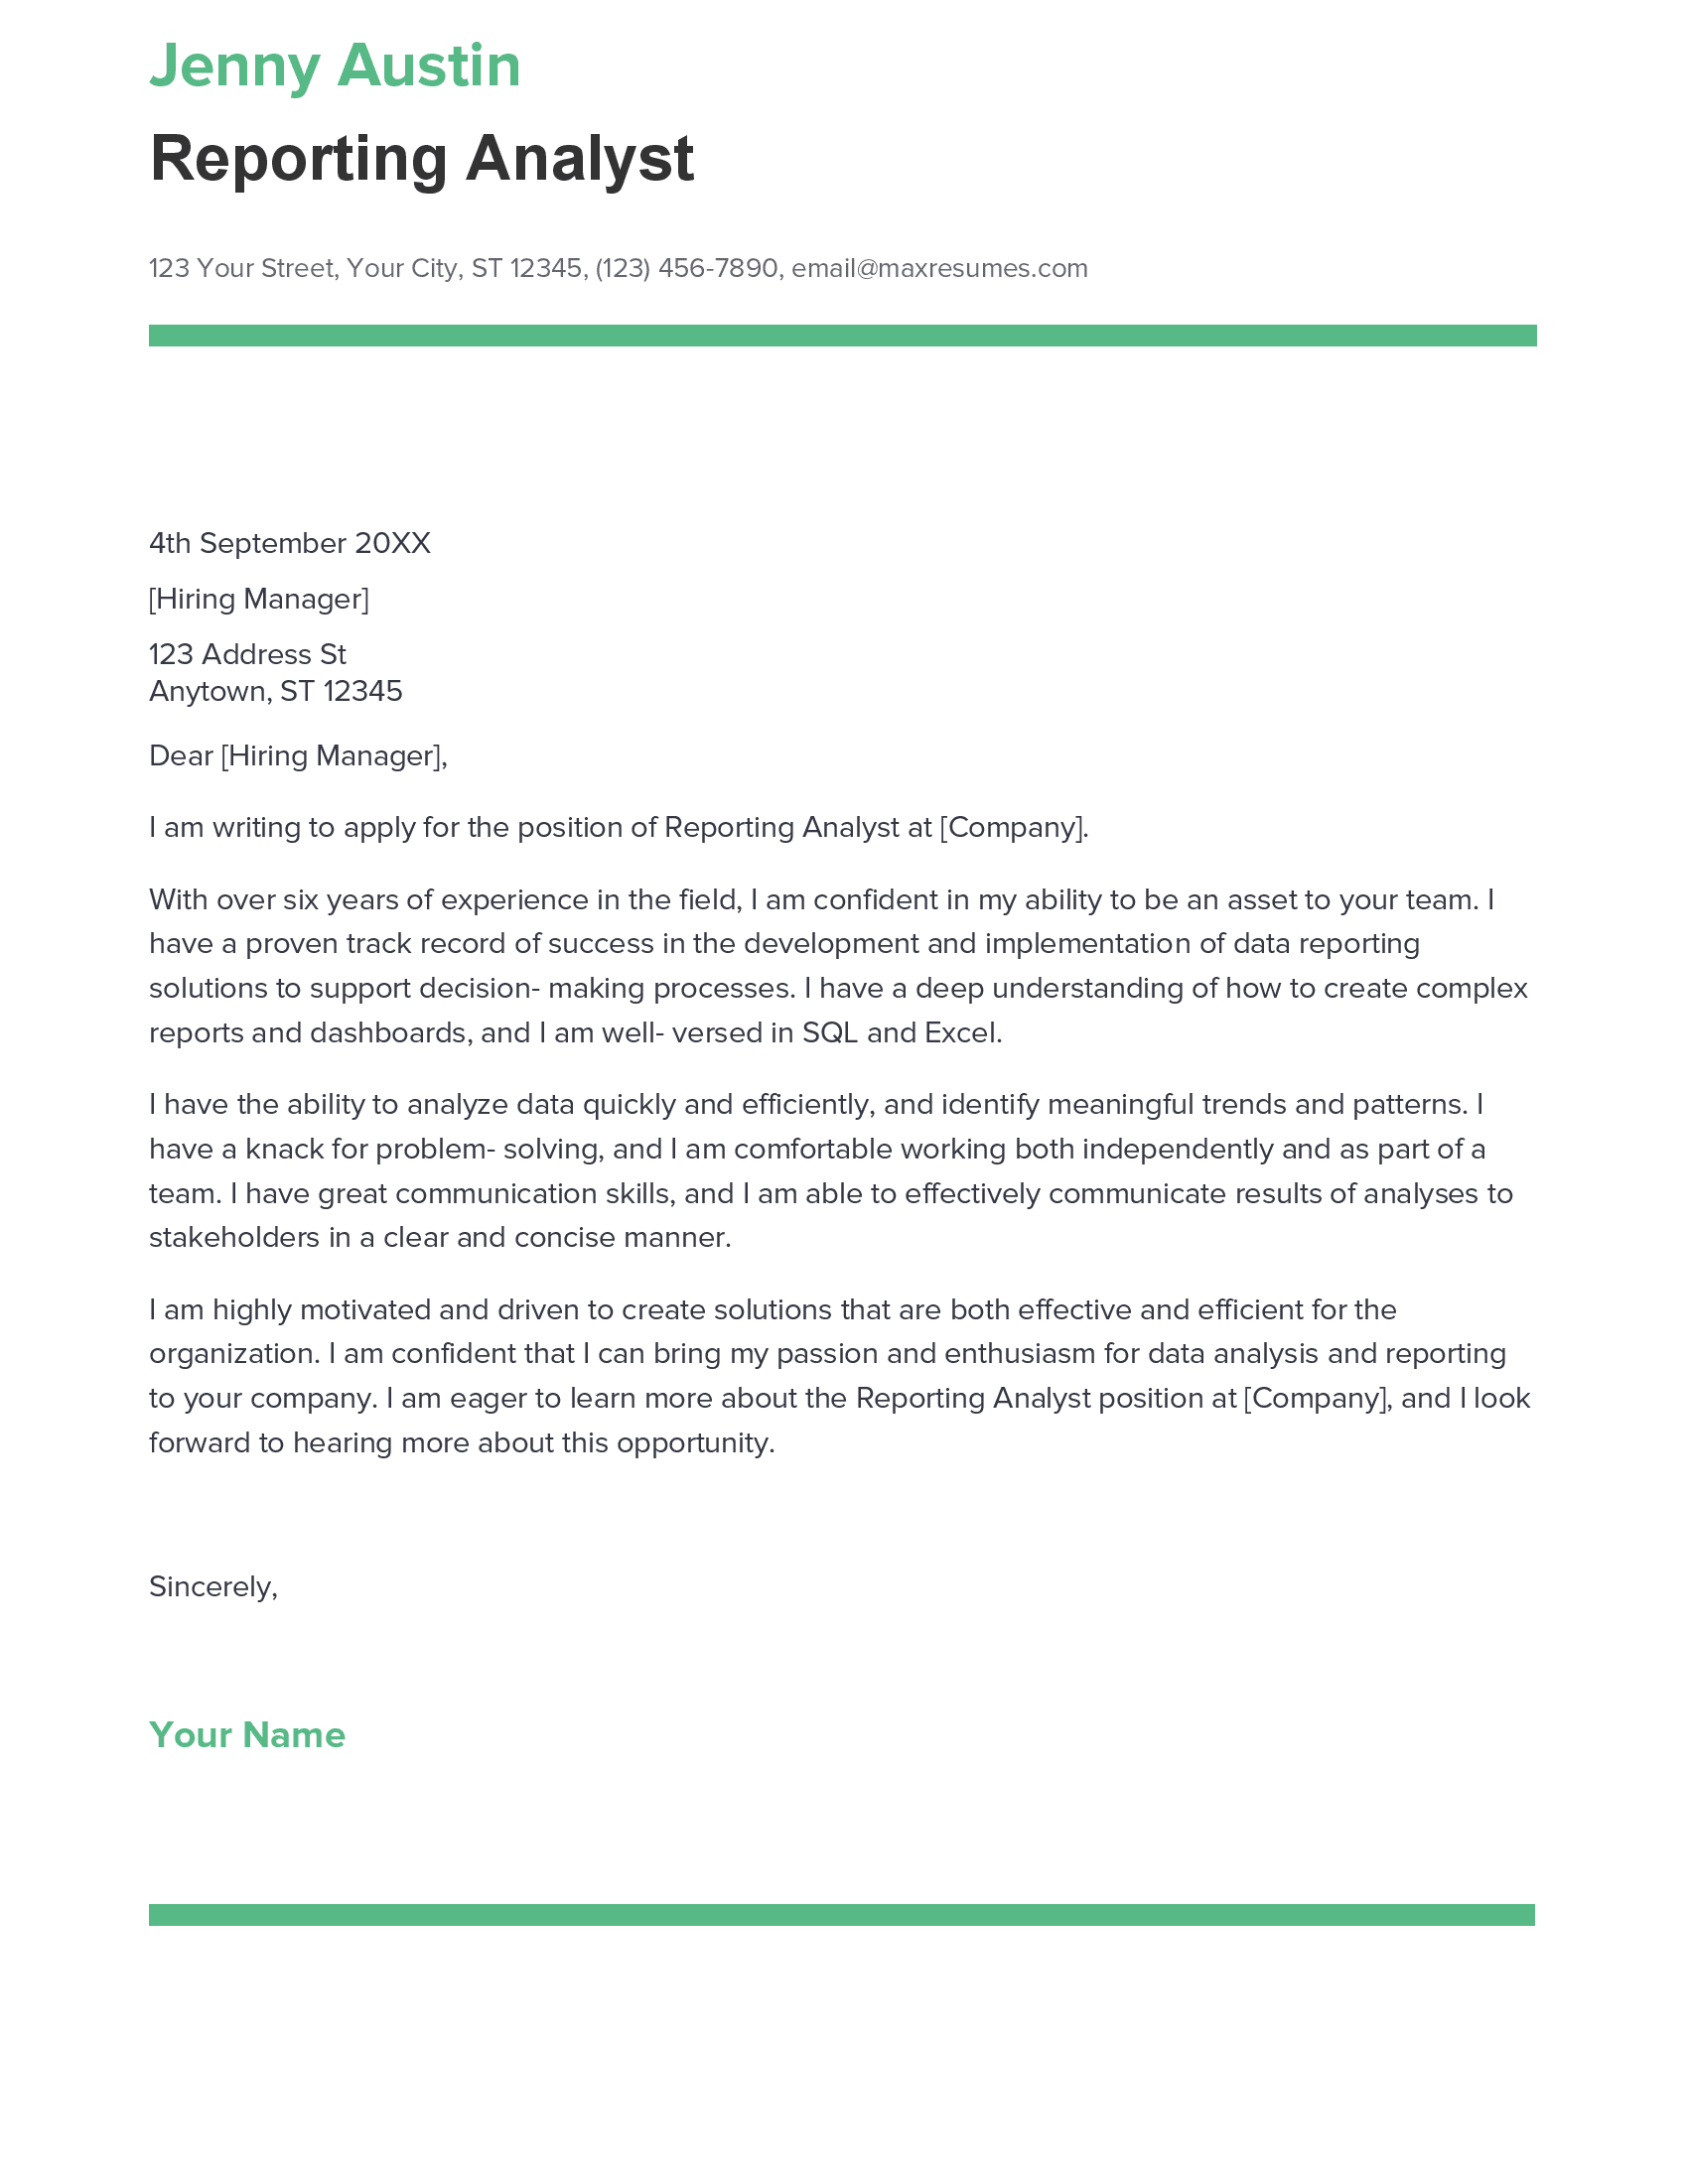 cover letter example for reporting analyst